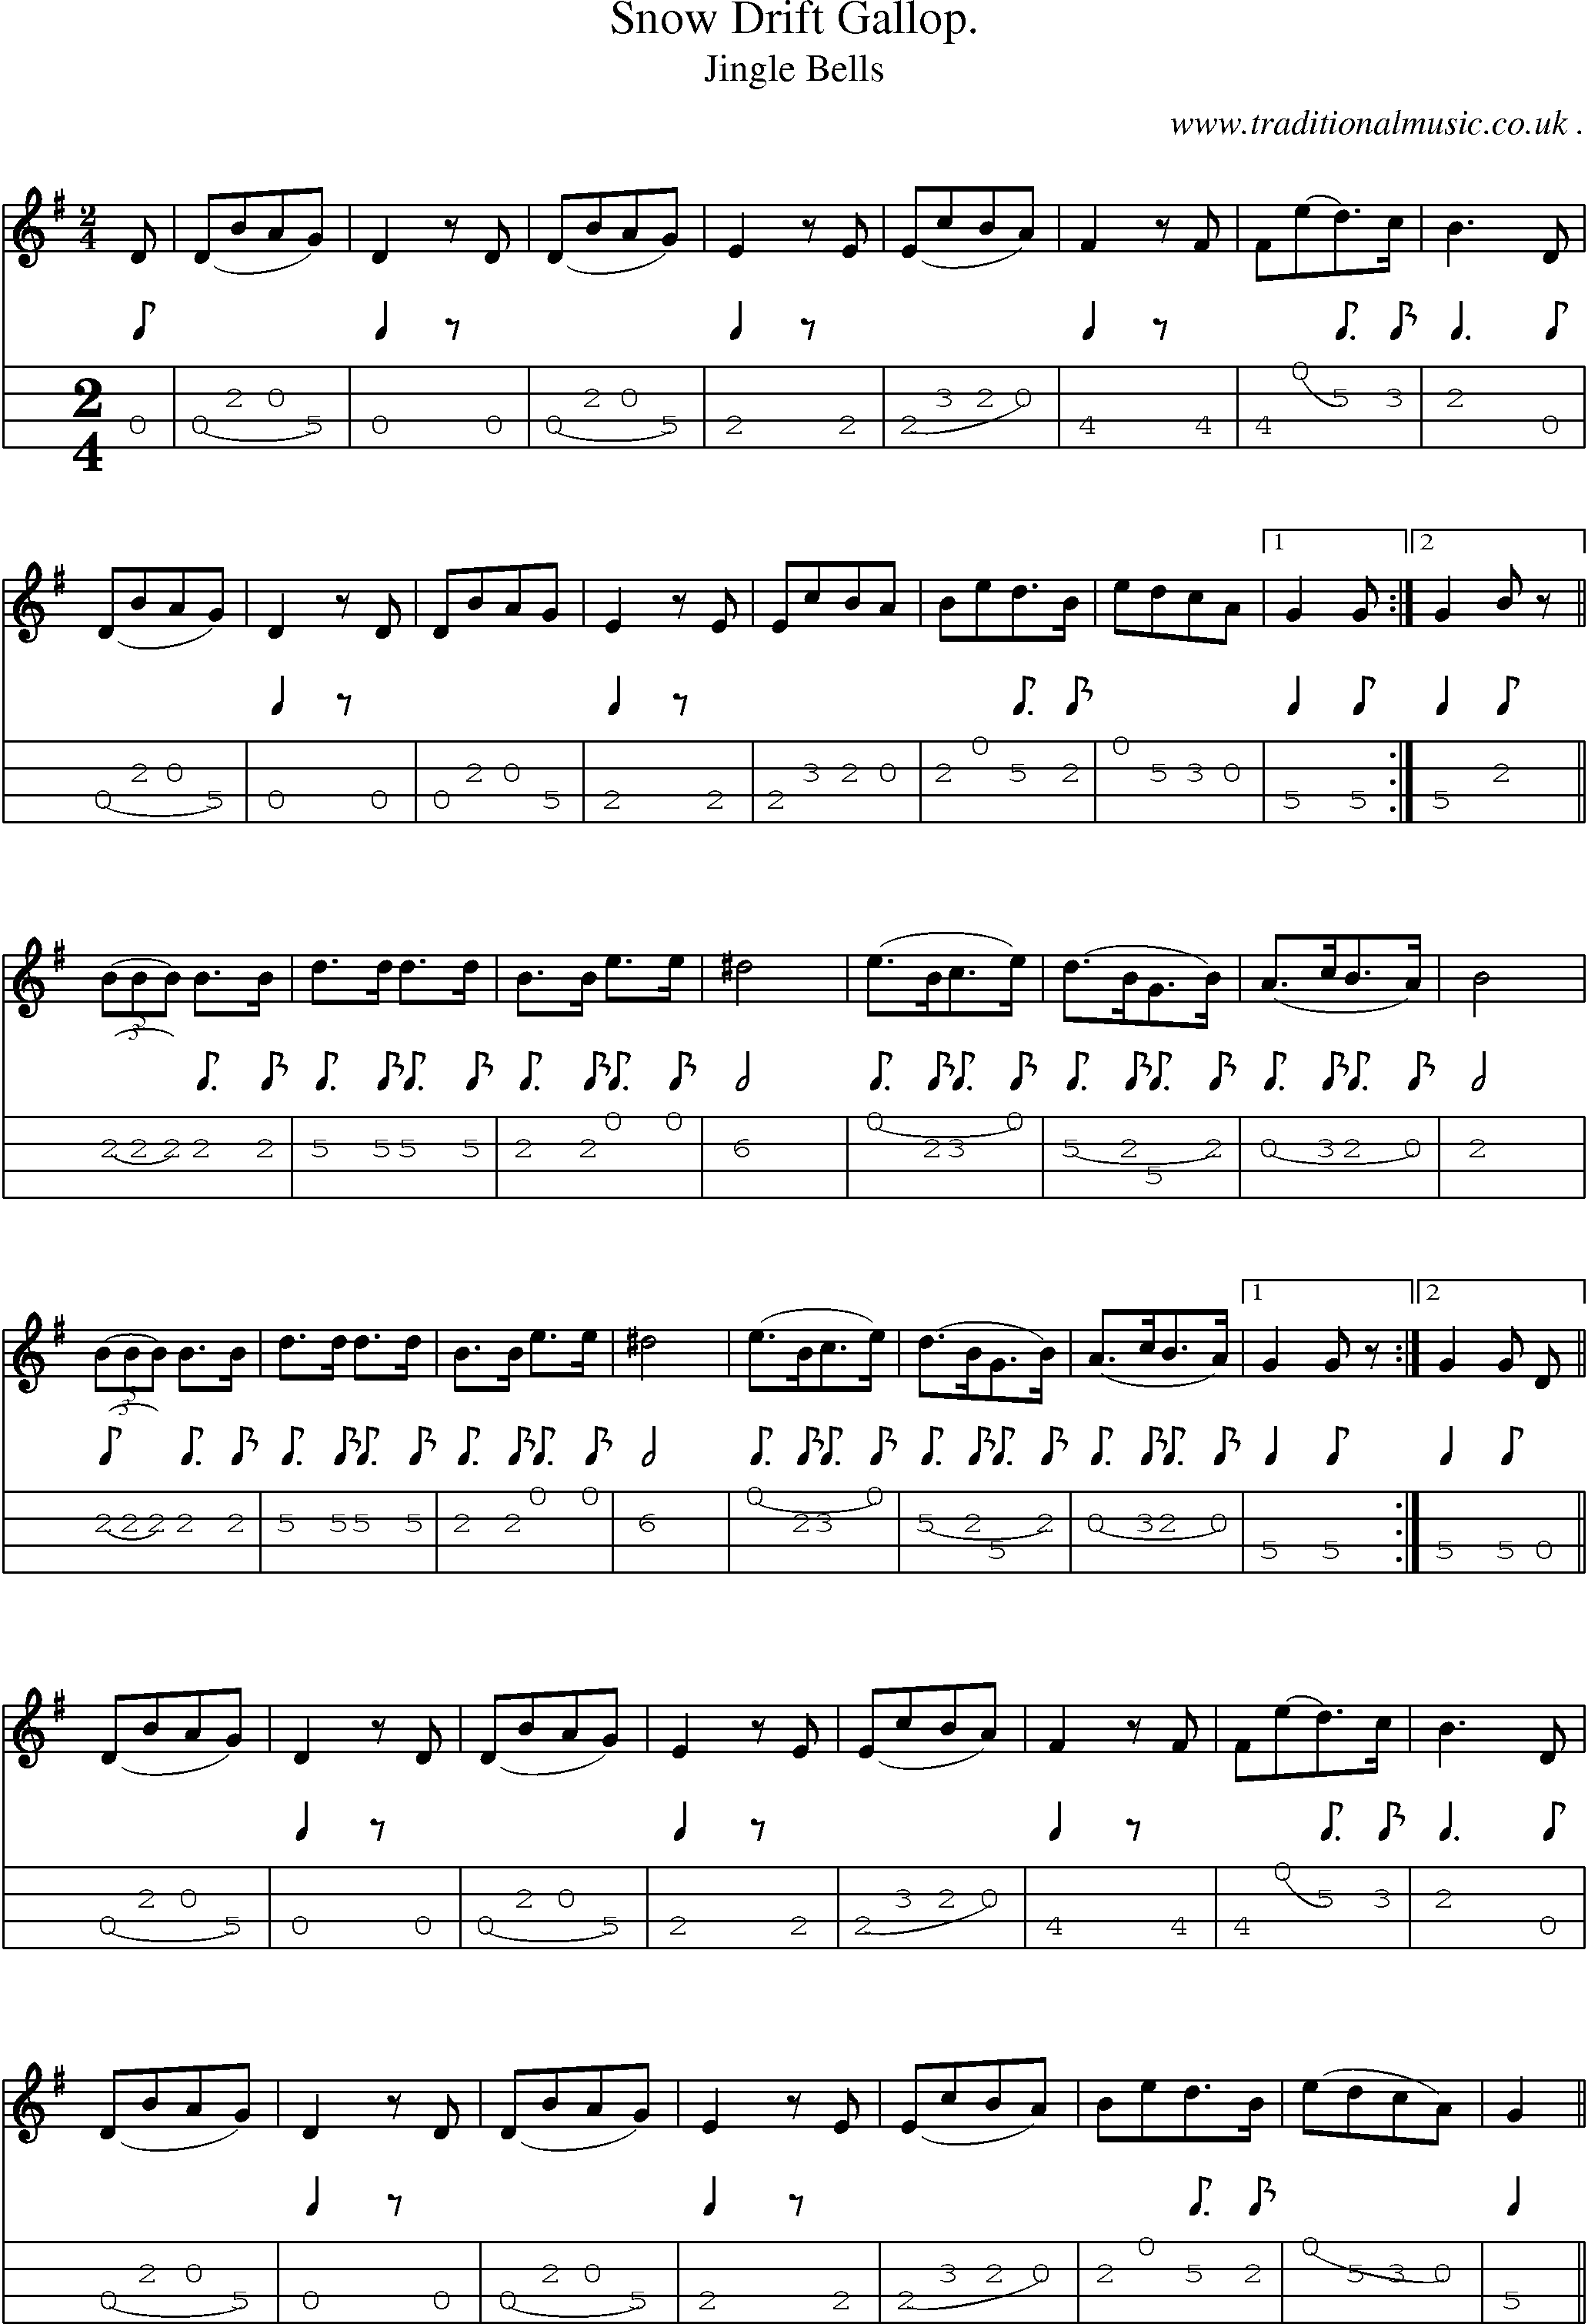 Sheet-Music and Mandolin Tabs for Snow Drift Gallop